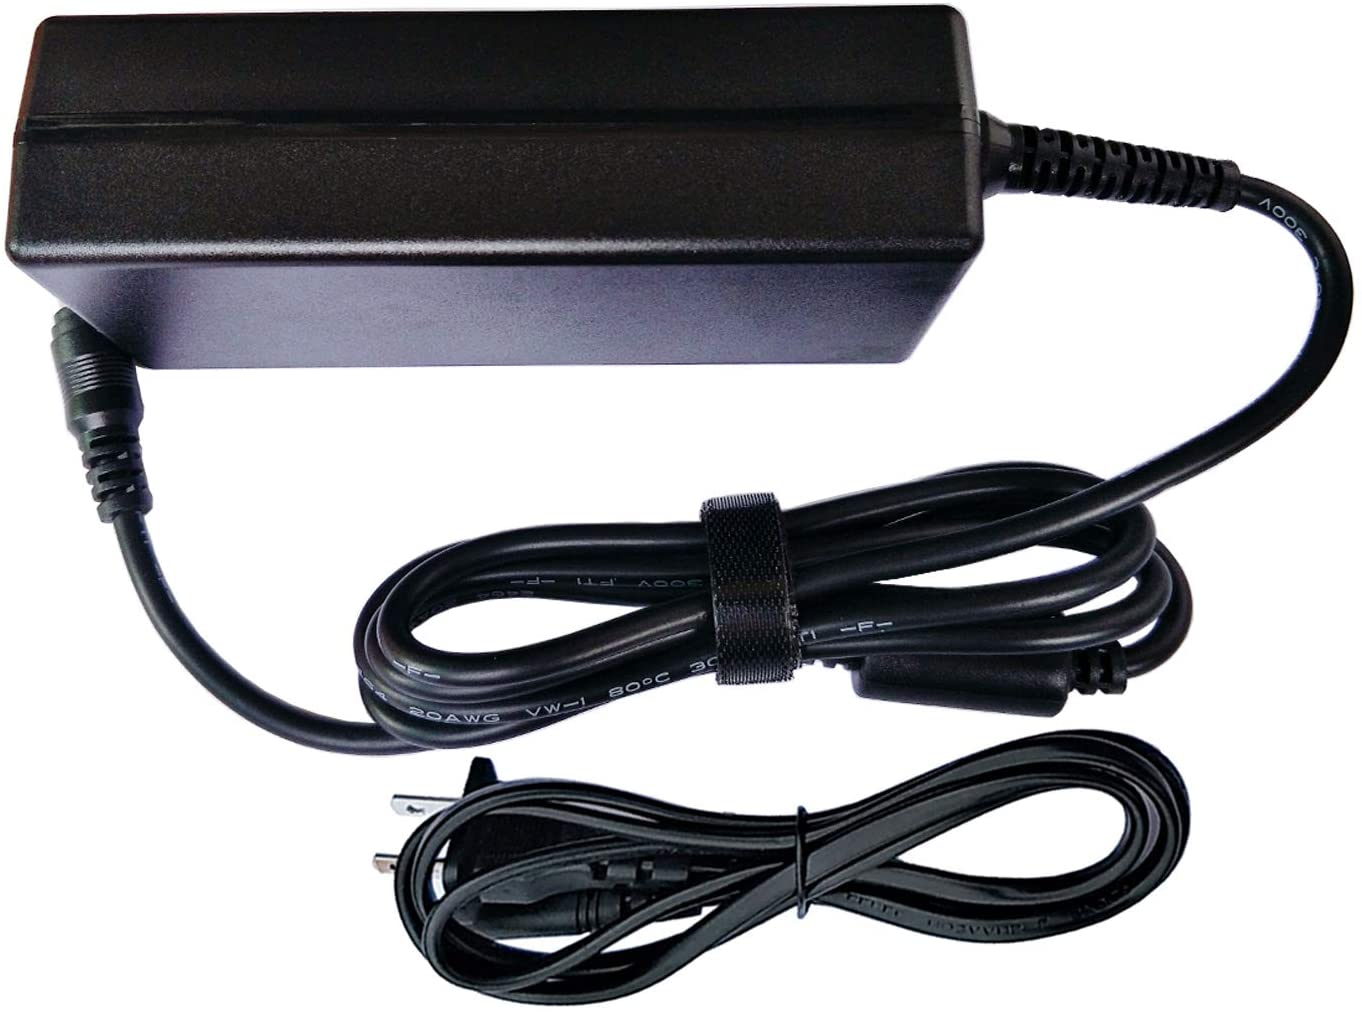 UPBRIGHT NEW Global AC / DC Adapter For AXIS T8006 PS12 Power Supply Fits AXIS Q19 Series Network Camera 5030-062 5030-063 5030-064 5030-065 5030-066 5030-067 5030-068 5030-069 5030-112 - image 2 of 5